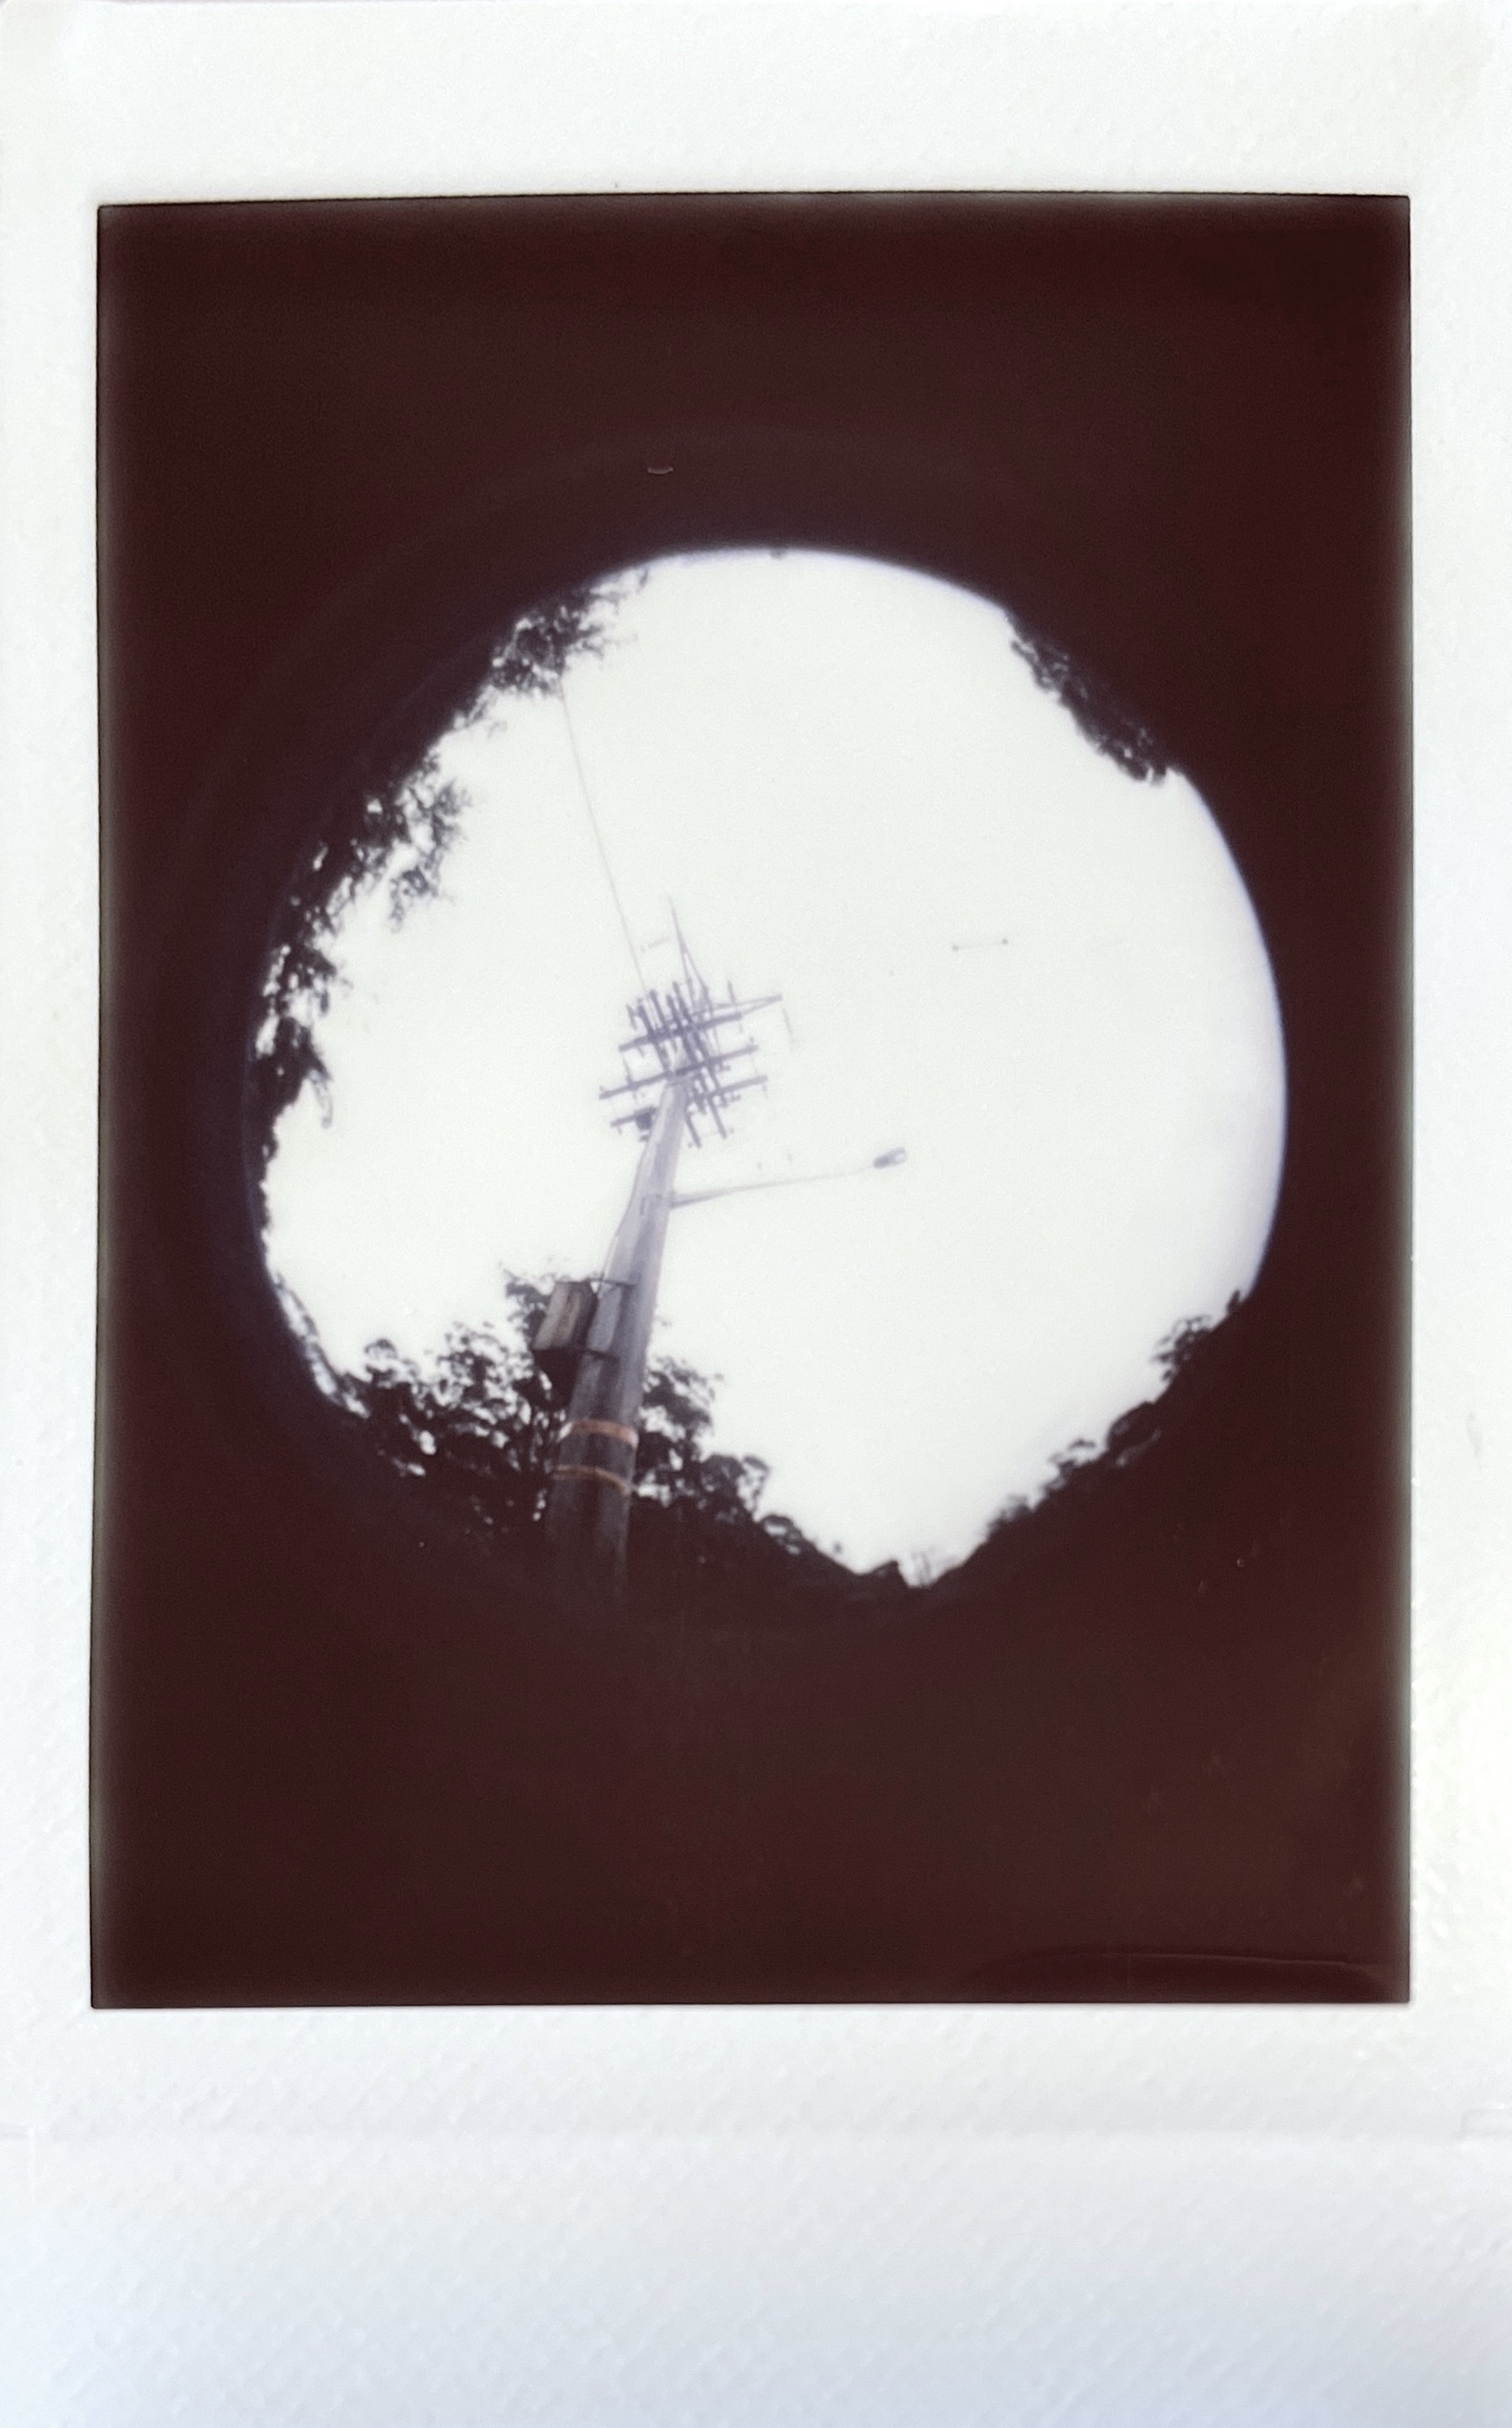 An instant photo looking up at a power line through a fisheye, creating the effect of a circle surrounded by darkness